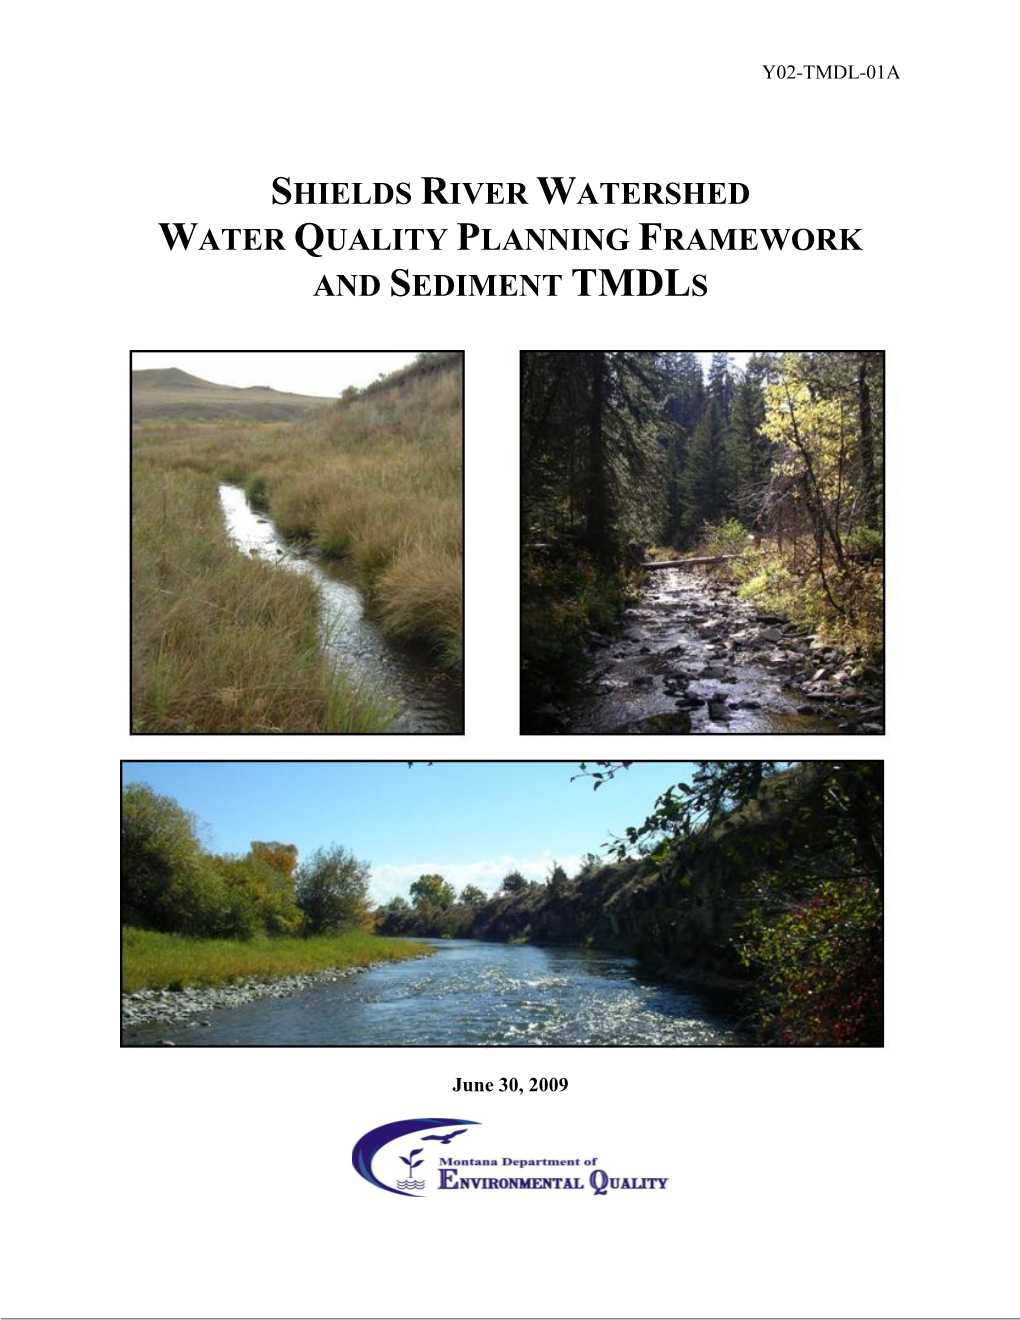 Shields River Watershed Water Quality Planning Framework and Sediment Tmdls